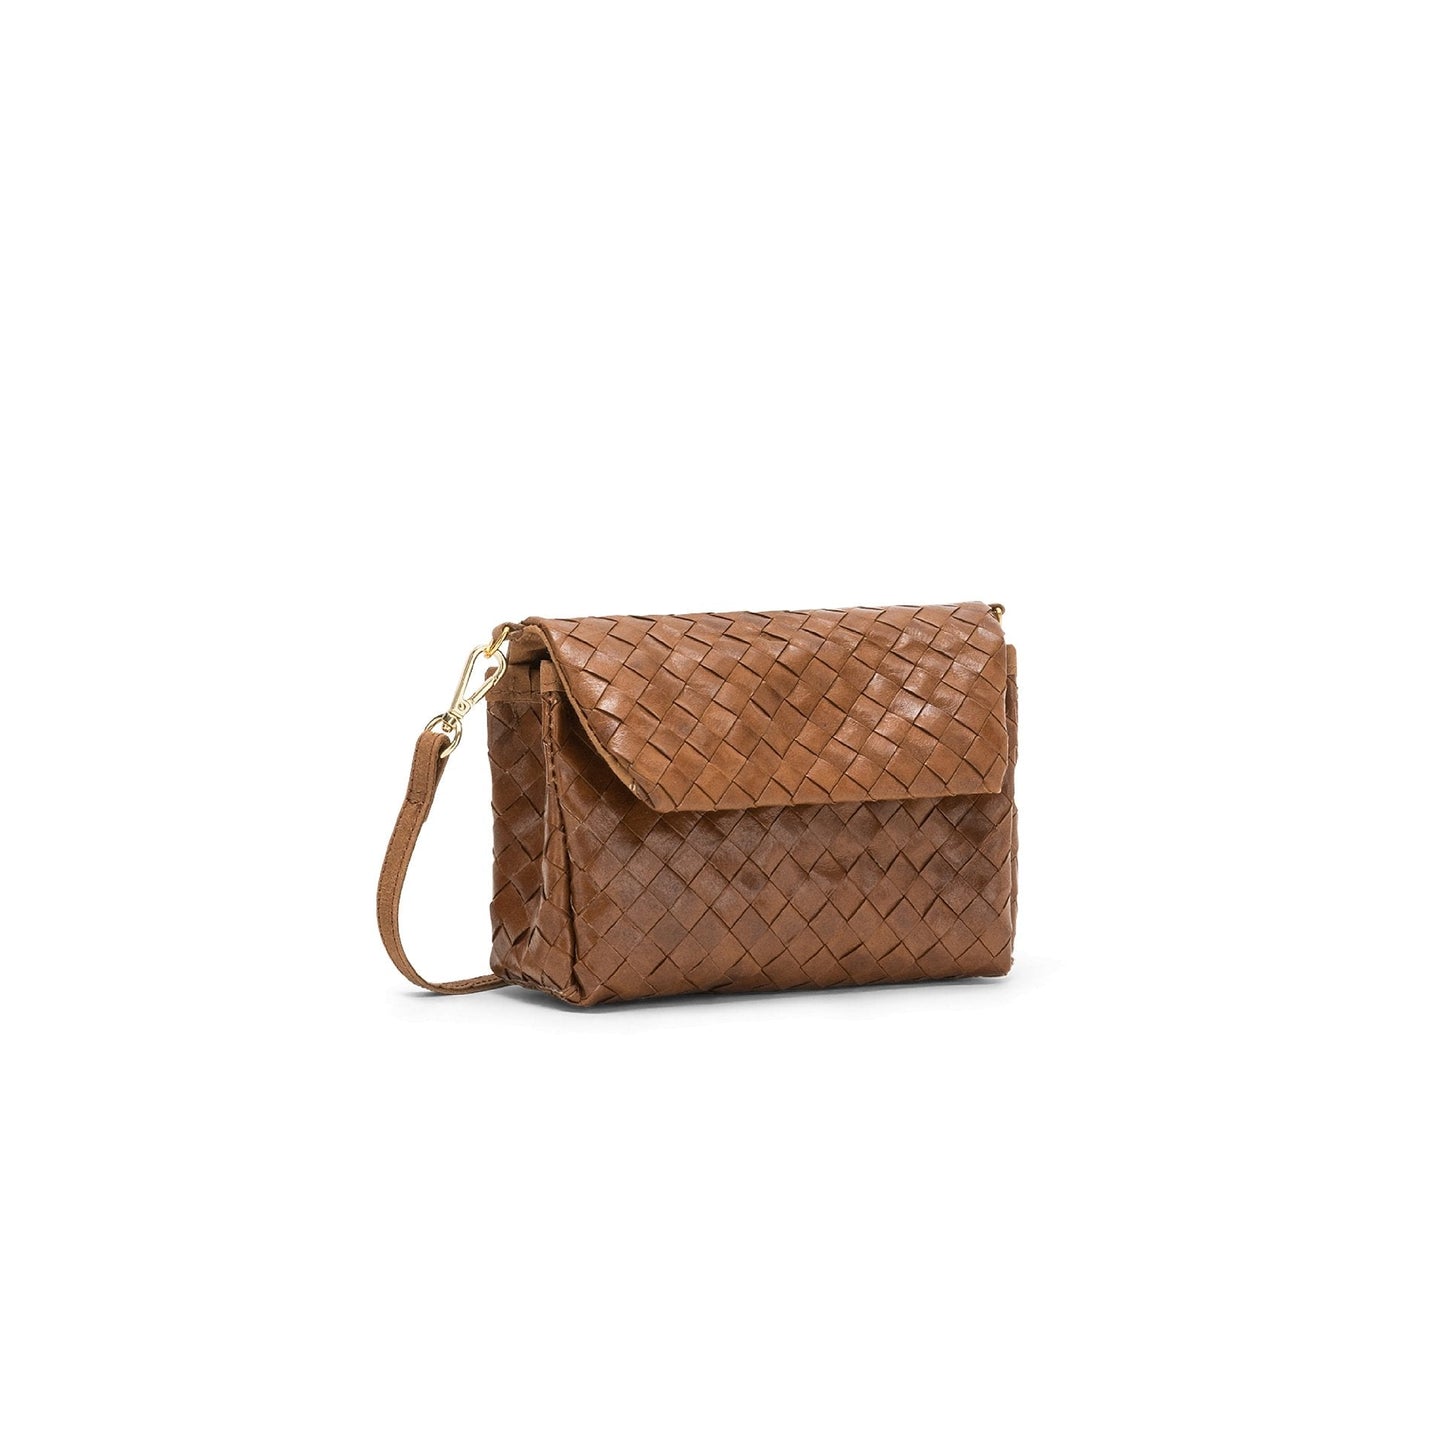 A small woven washable paper handbag is shown. The bag has a front flap closure and a washable paper strap attached to the bag by metal clips. The bag is shown in tan.